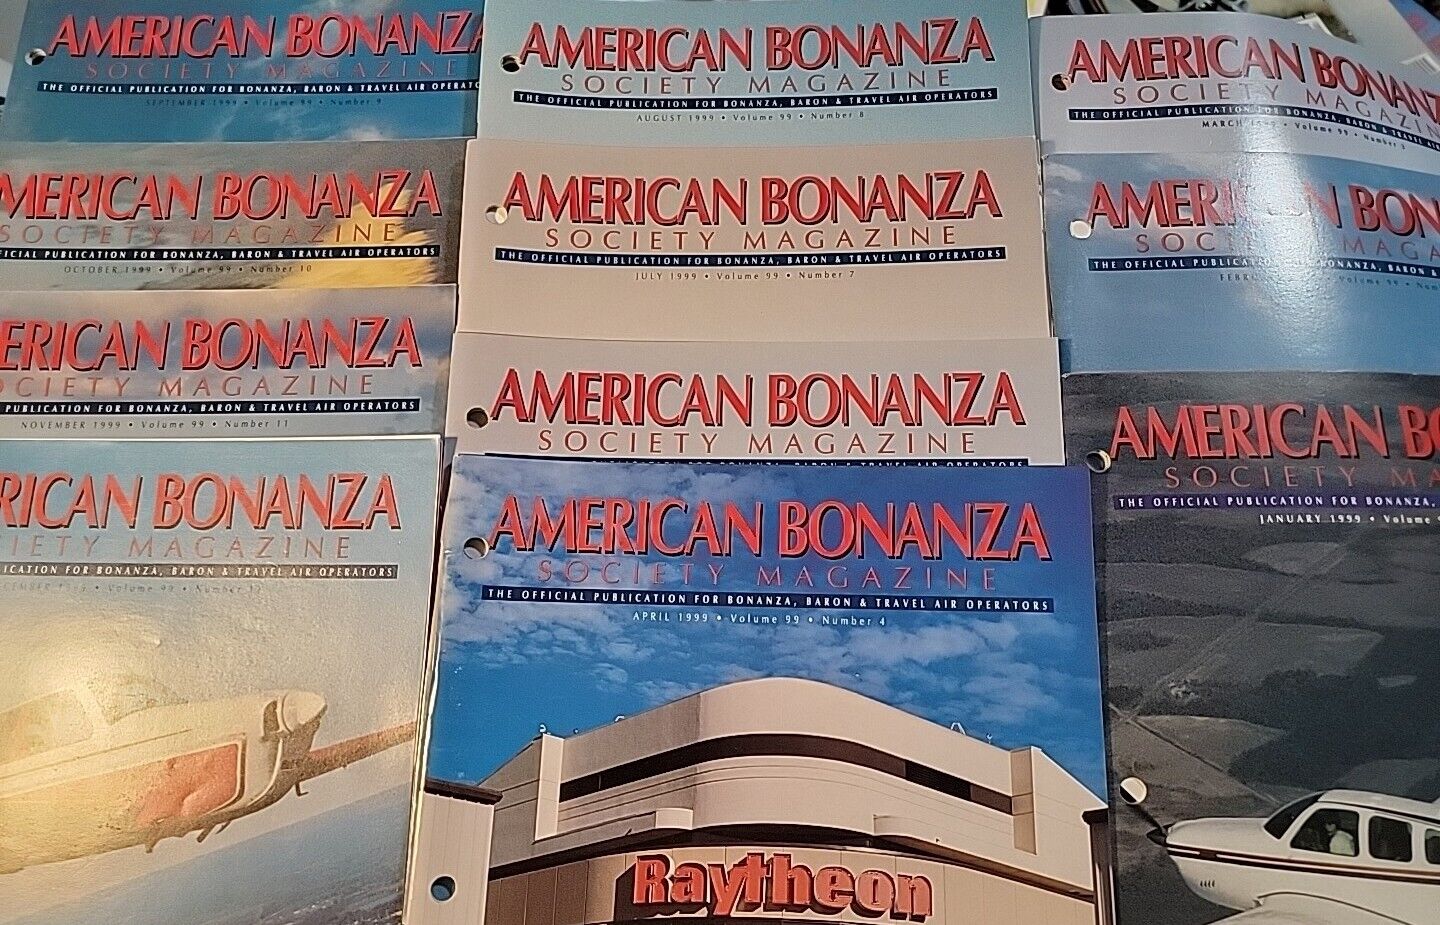 🛫VINTAGE🛬 ABS AMERICAN BONANZA SOCIETY MAGAZINE🔥🔥COMPLETE YEAR 1999 TOTAL 11